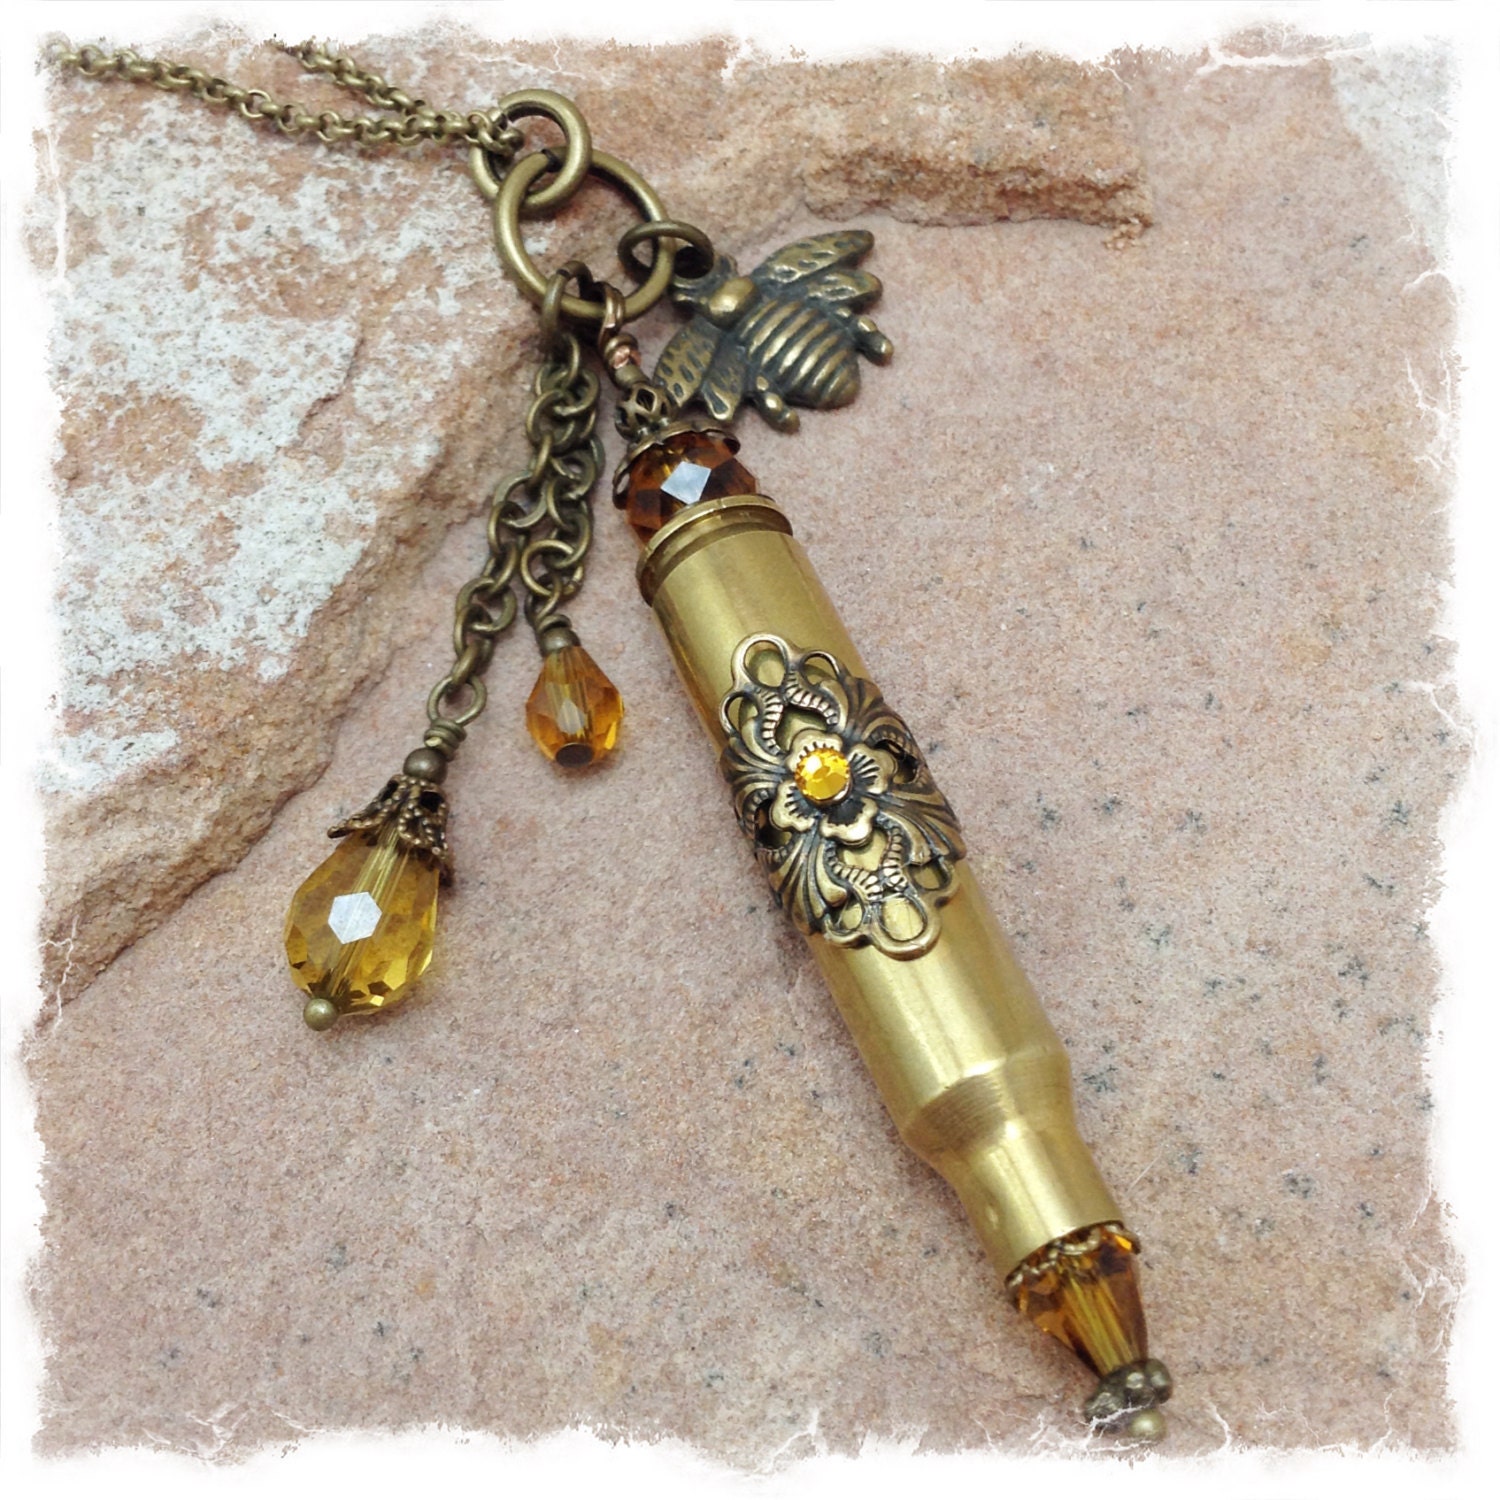 Bullet Necklace Pendant Shell Casing Jewelry Bullet Jewelry